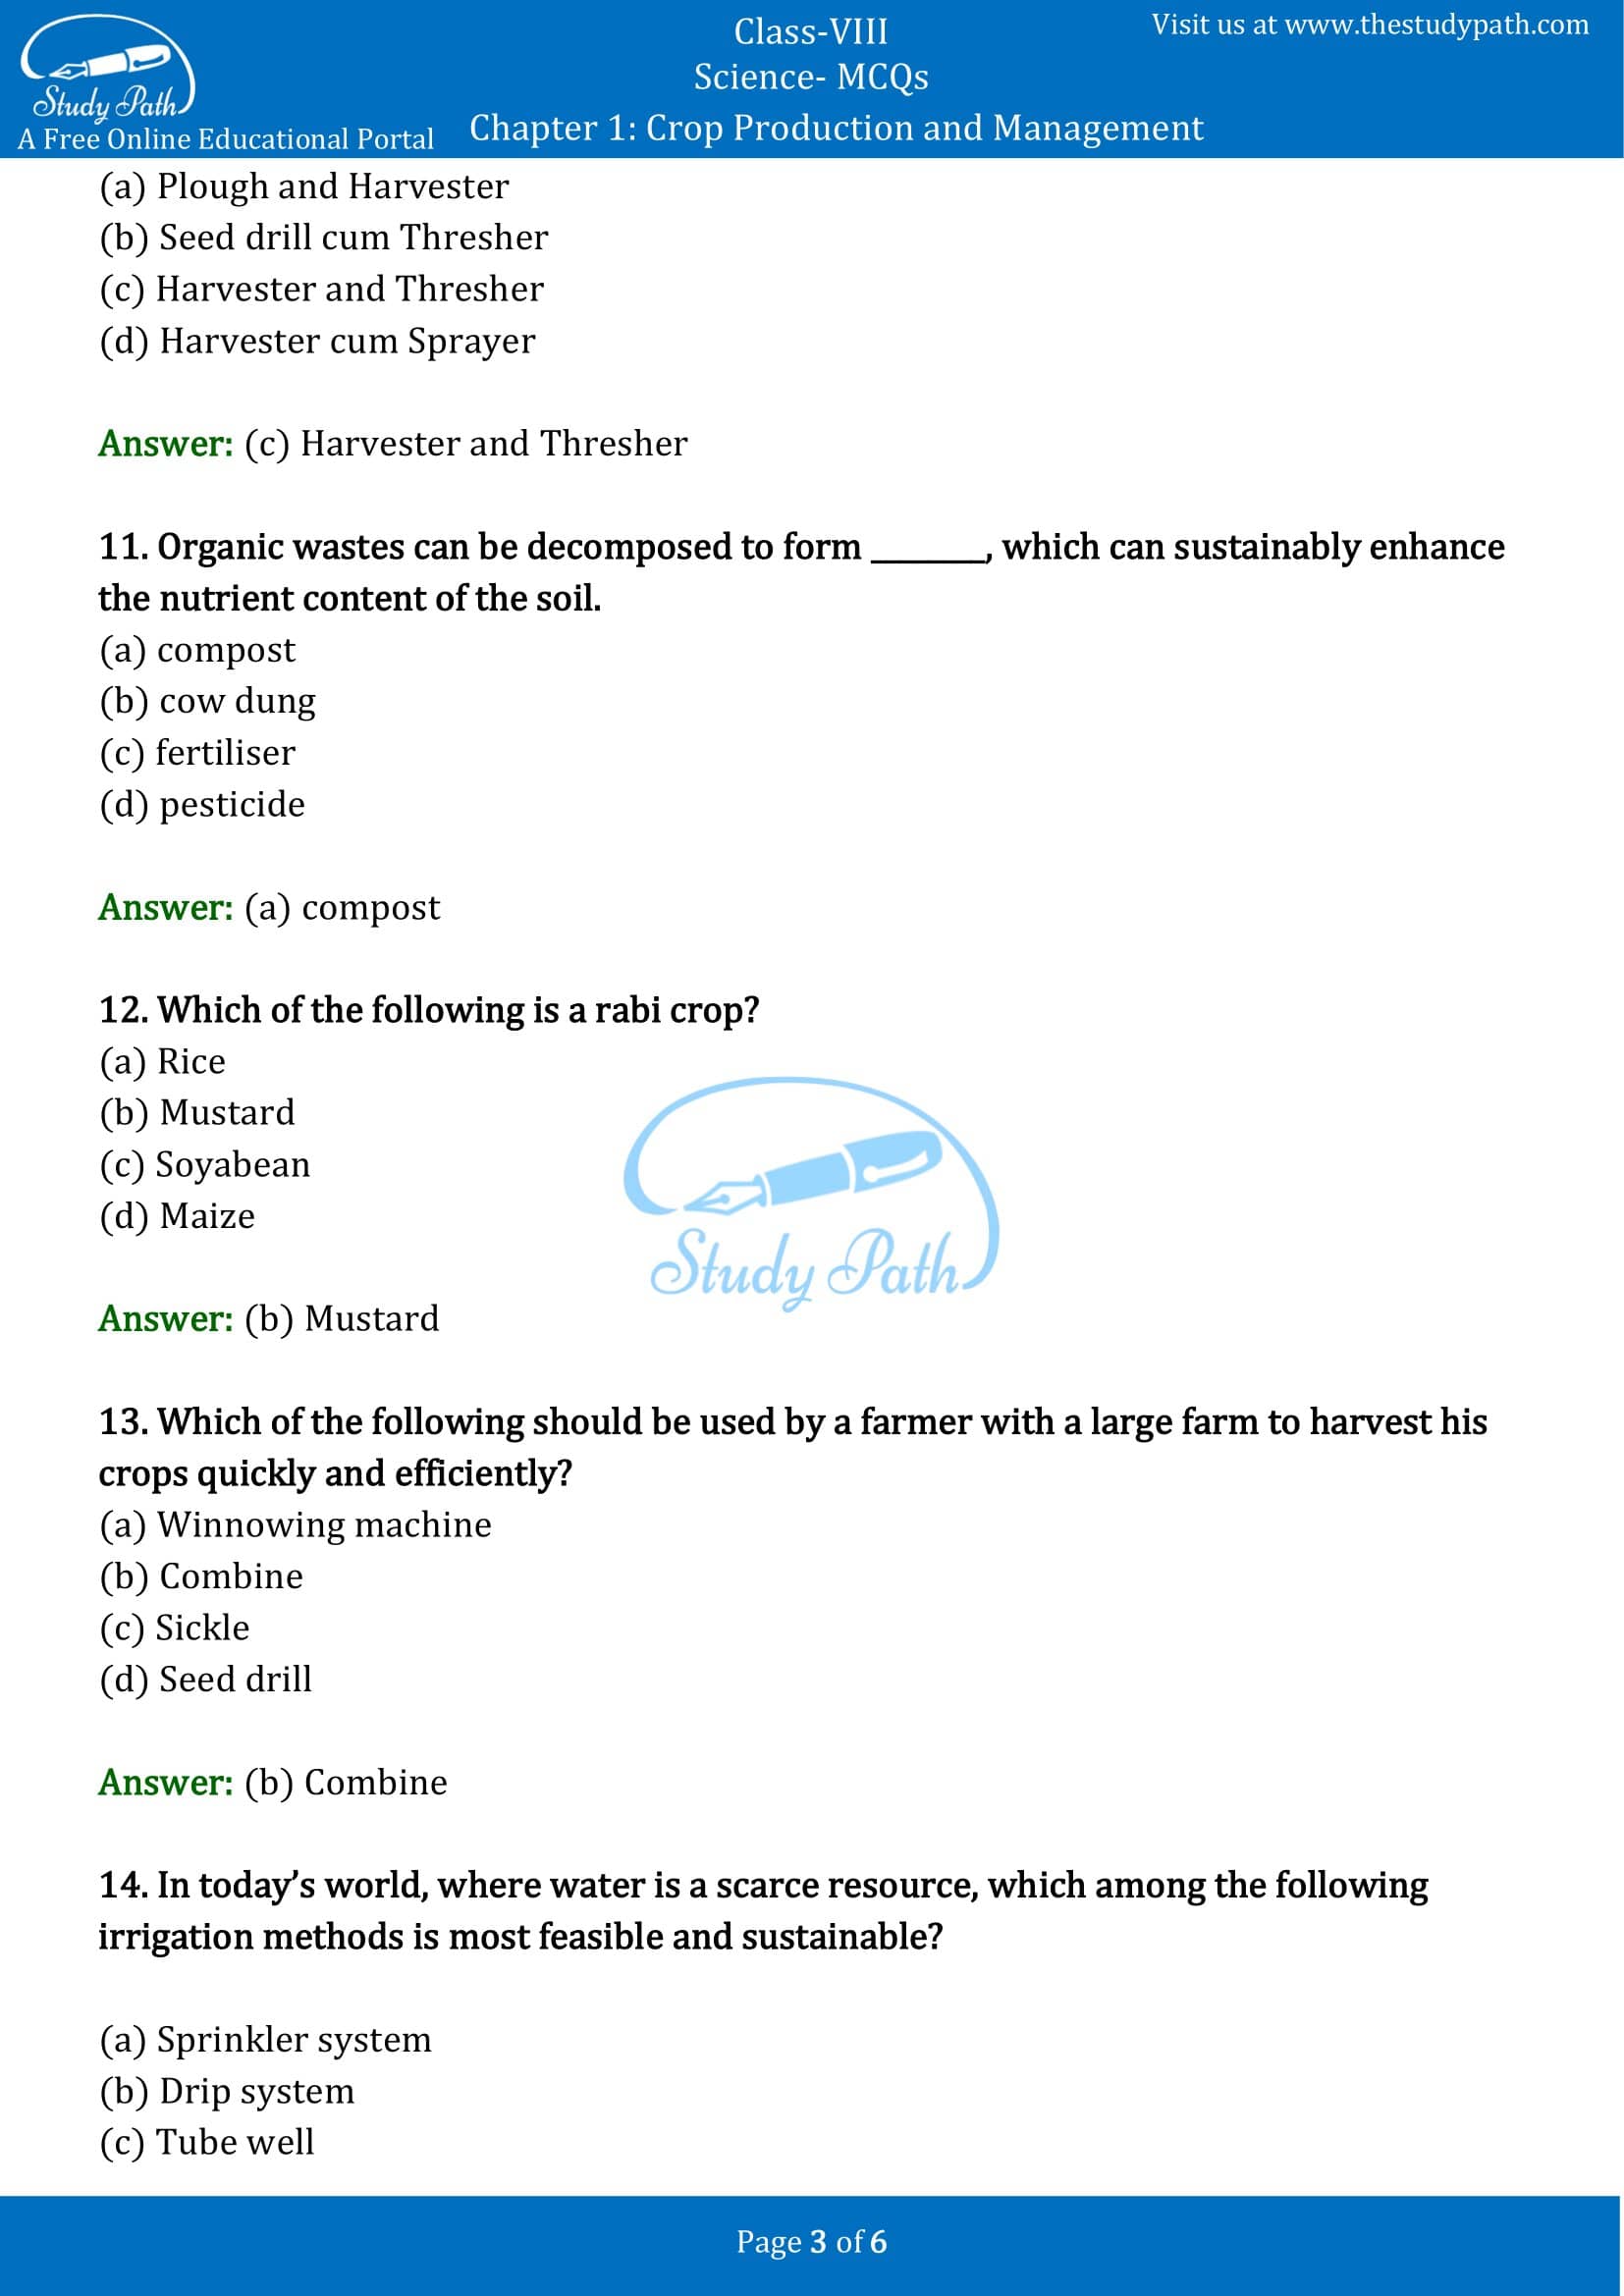 MCQ Questions for Class 8 Science Chapter 1 Crop Production and Management with Answers PDF -3